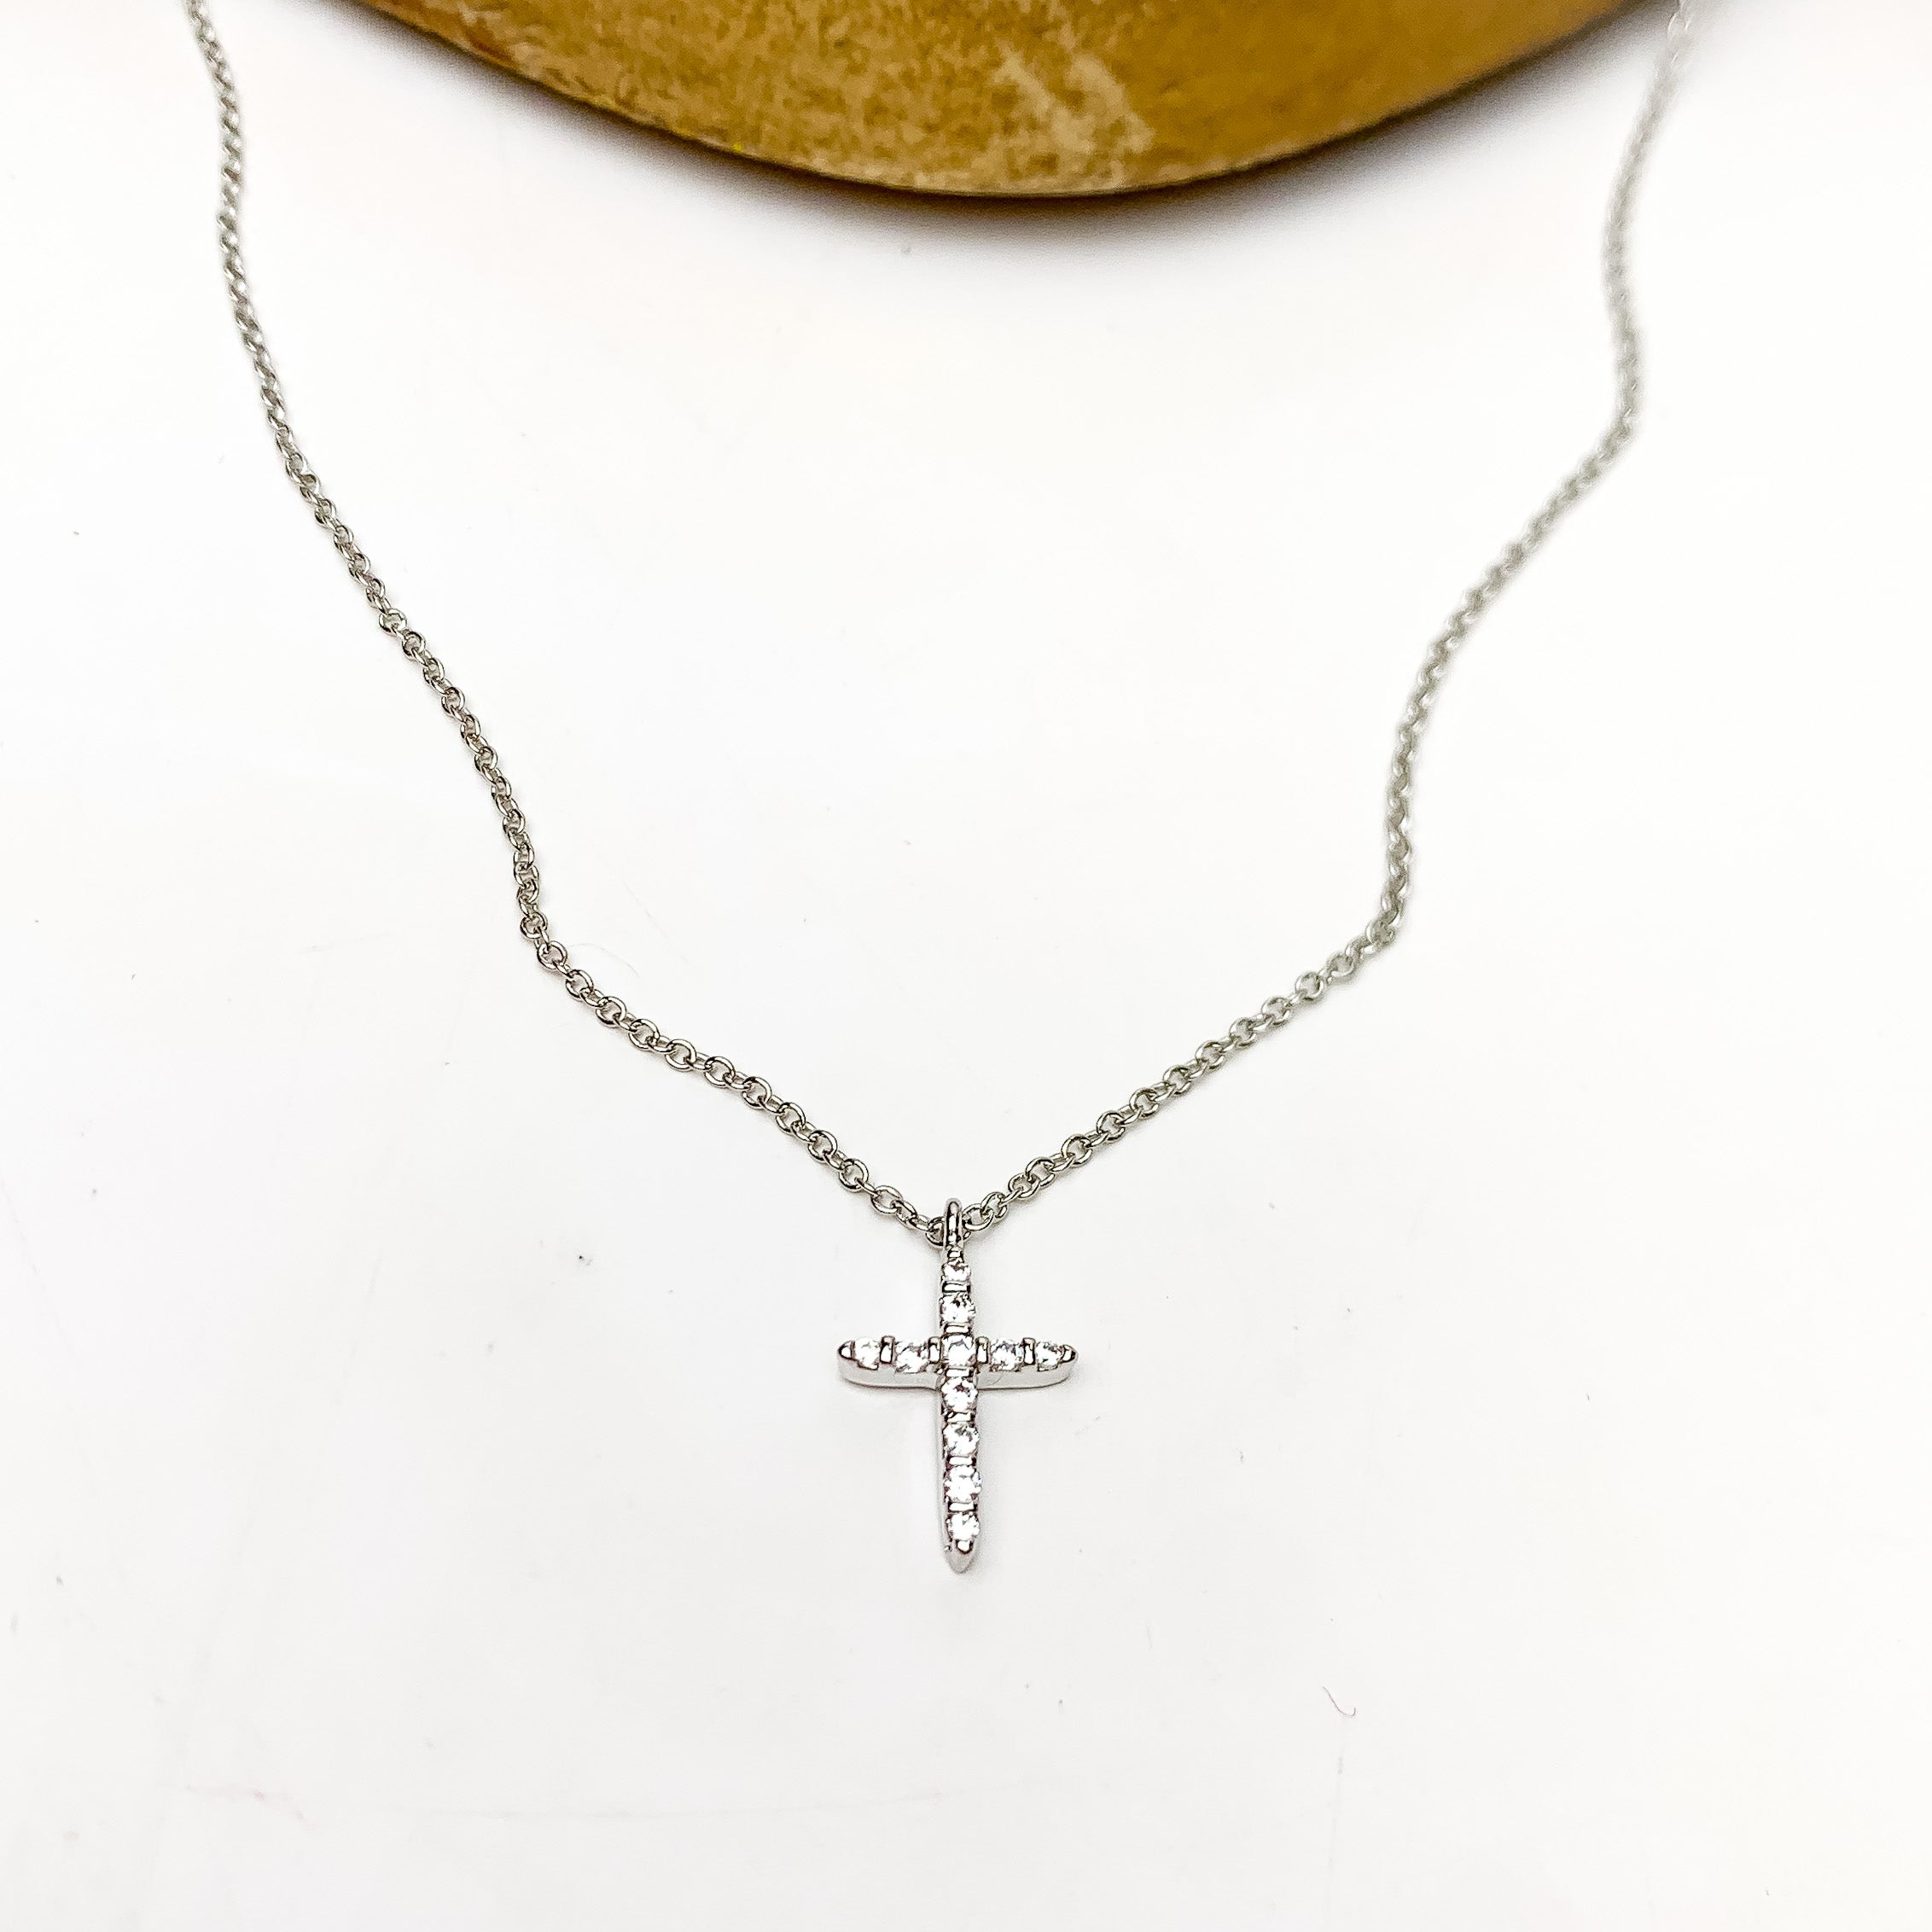 Silver Tone Glory Chain Necklace With Clear Crystal Cross - Giddy Up Glamour Boutique